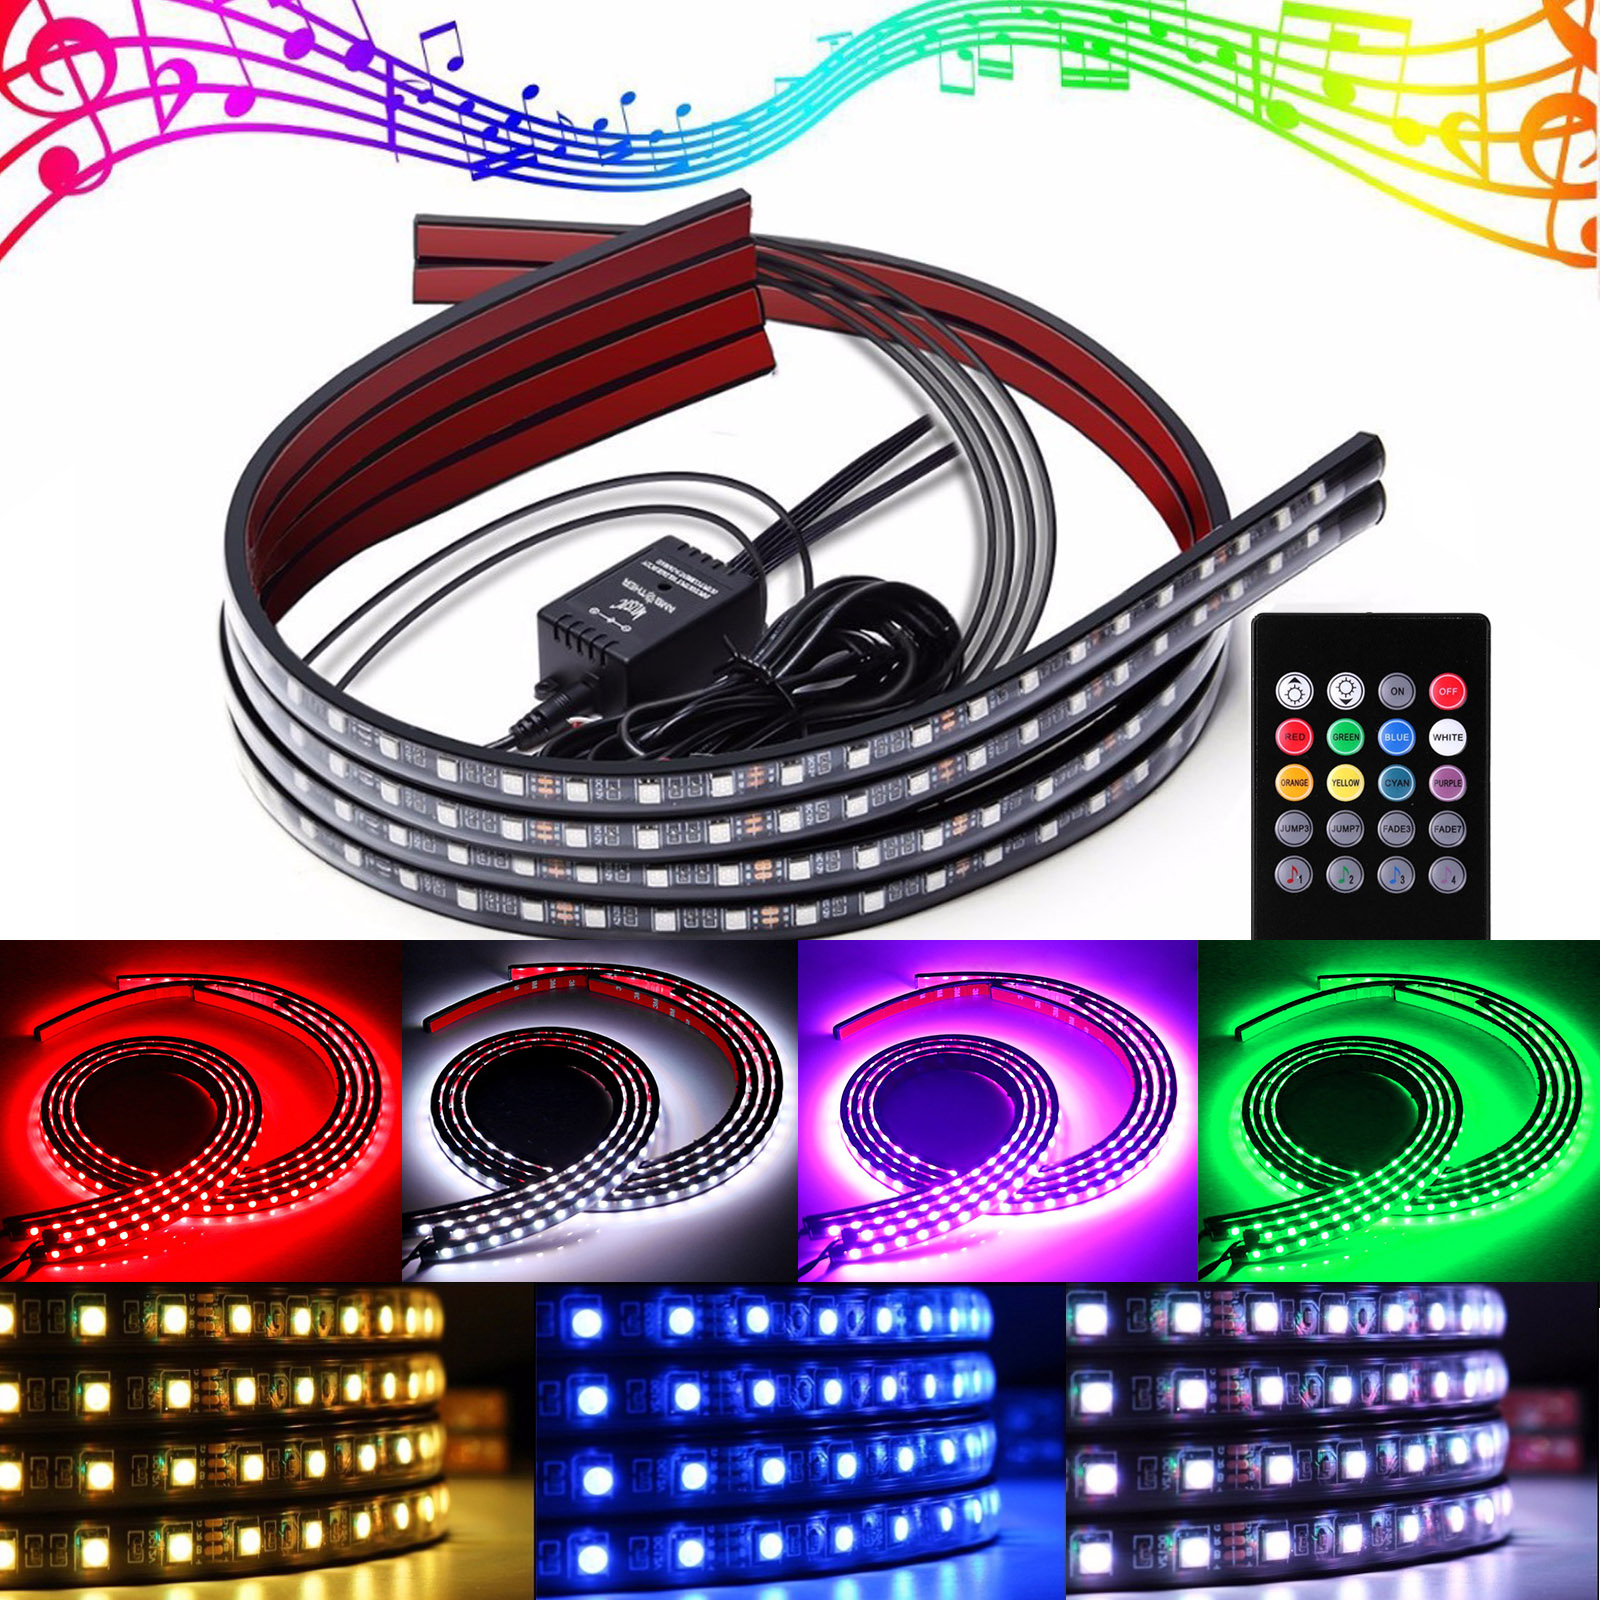 8 Color Car Neon Underglow Lights Waterproof RGB LED Strip Light Wireless Remote Control 5050 SMD LED Light Strips DC 12V, 4pcs Neon Accent Lights Strip 